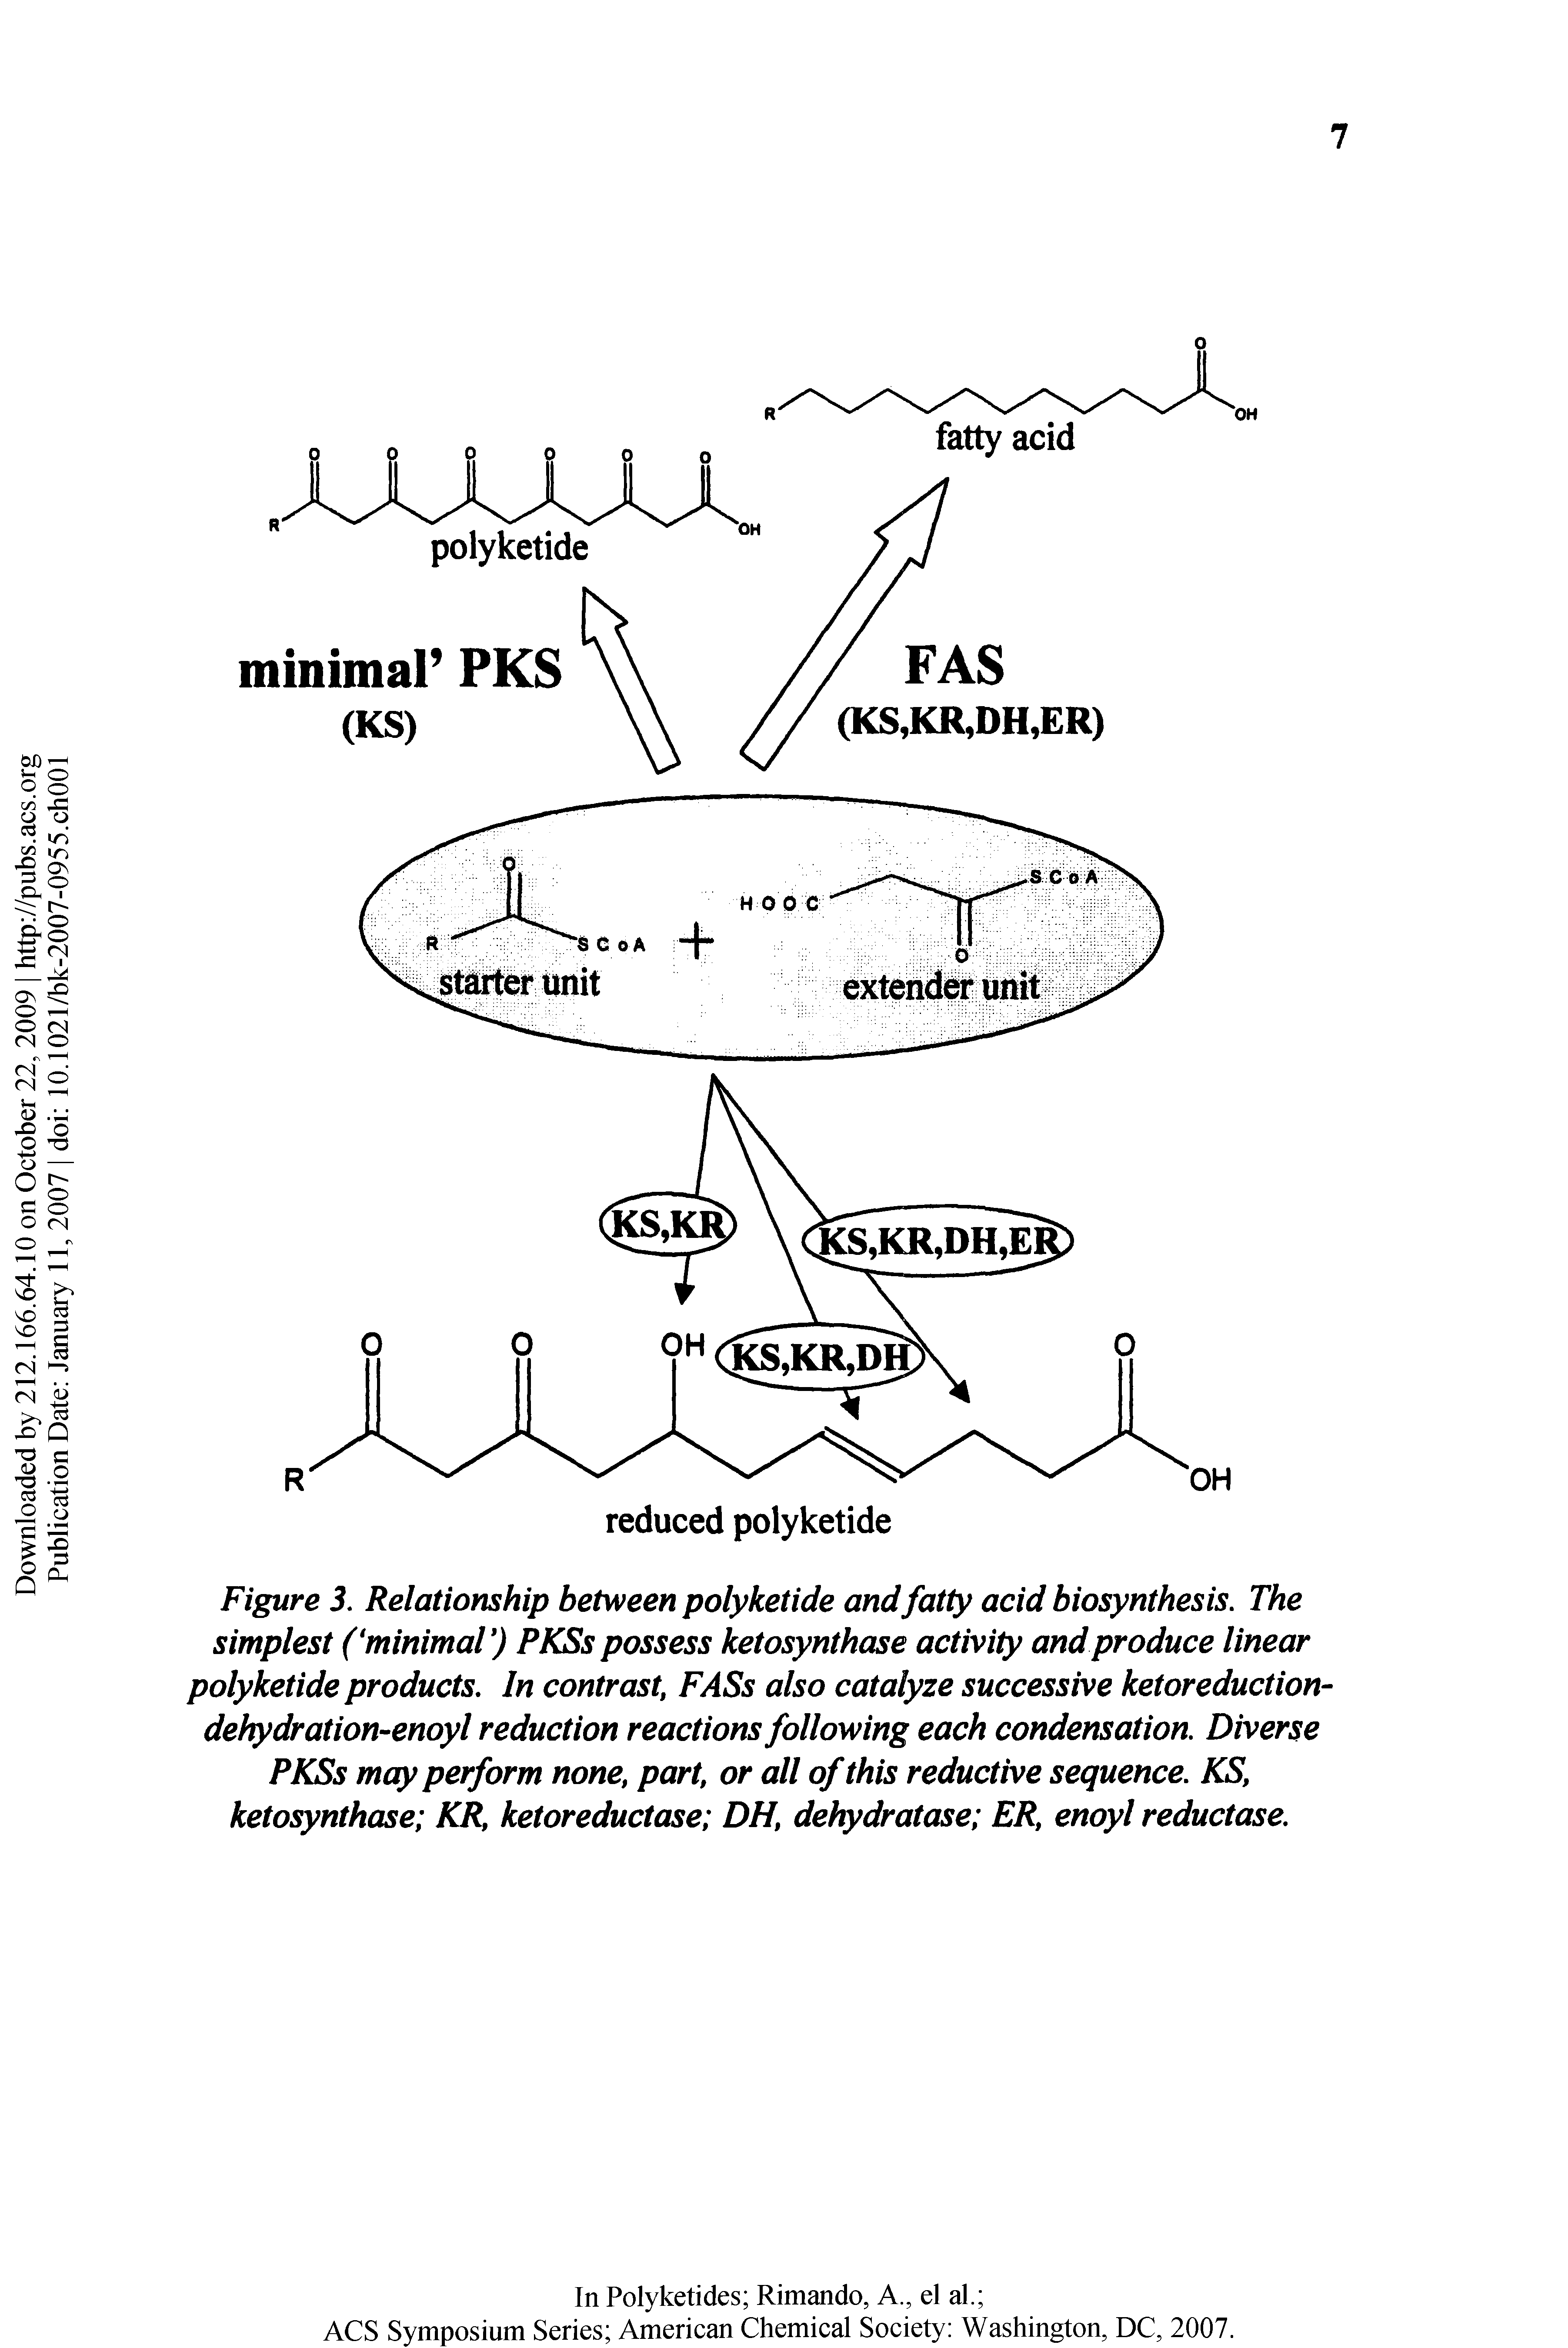 Figure 3. Relationship between polyketide and fatty acid biosynthesis. The simplest ( minimaV) PKSs possess ketosynthase activity and produce linear polyketide products. In contrast, FASs also catalyze successive ketoreduction-dehydration-enoyl reduction reactions following each condensation. Diverse PKSs may perform none, part, or all of this reductive sequence. KS, ketosynthase KR, ketoreductase DH, dehydratase ER, enoyl reductase.